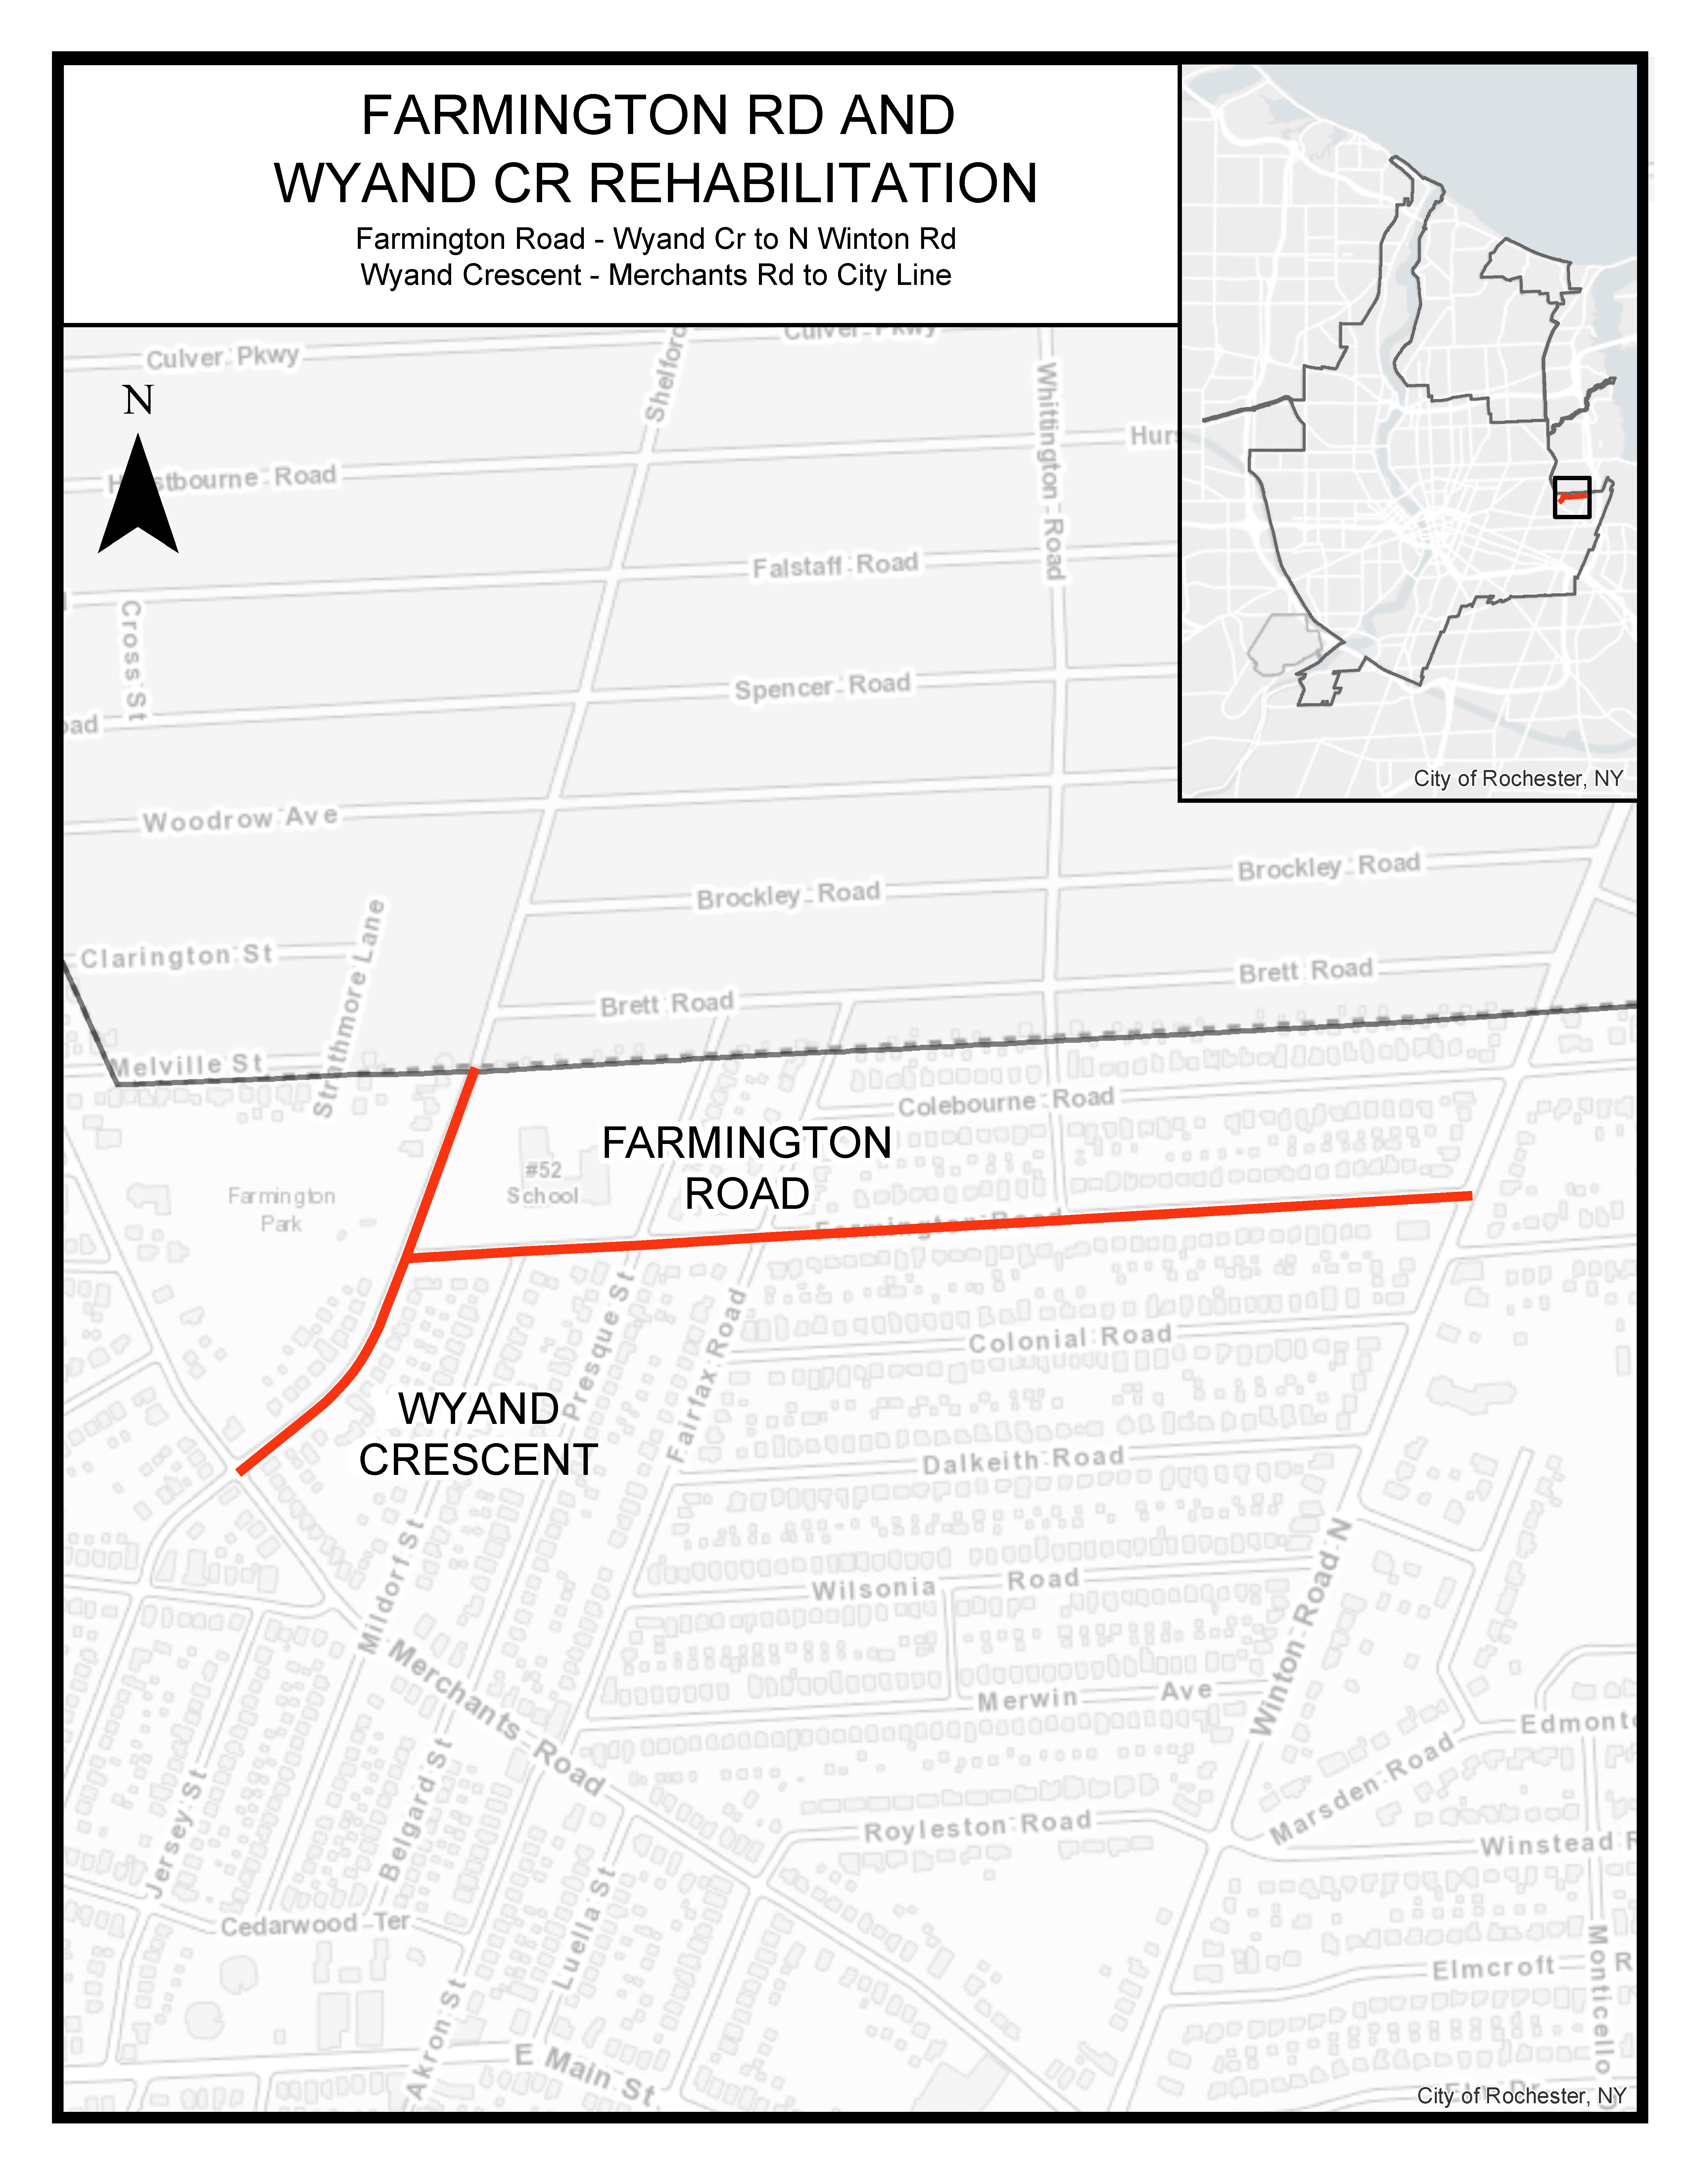 Farmington and Wyand Project Map